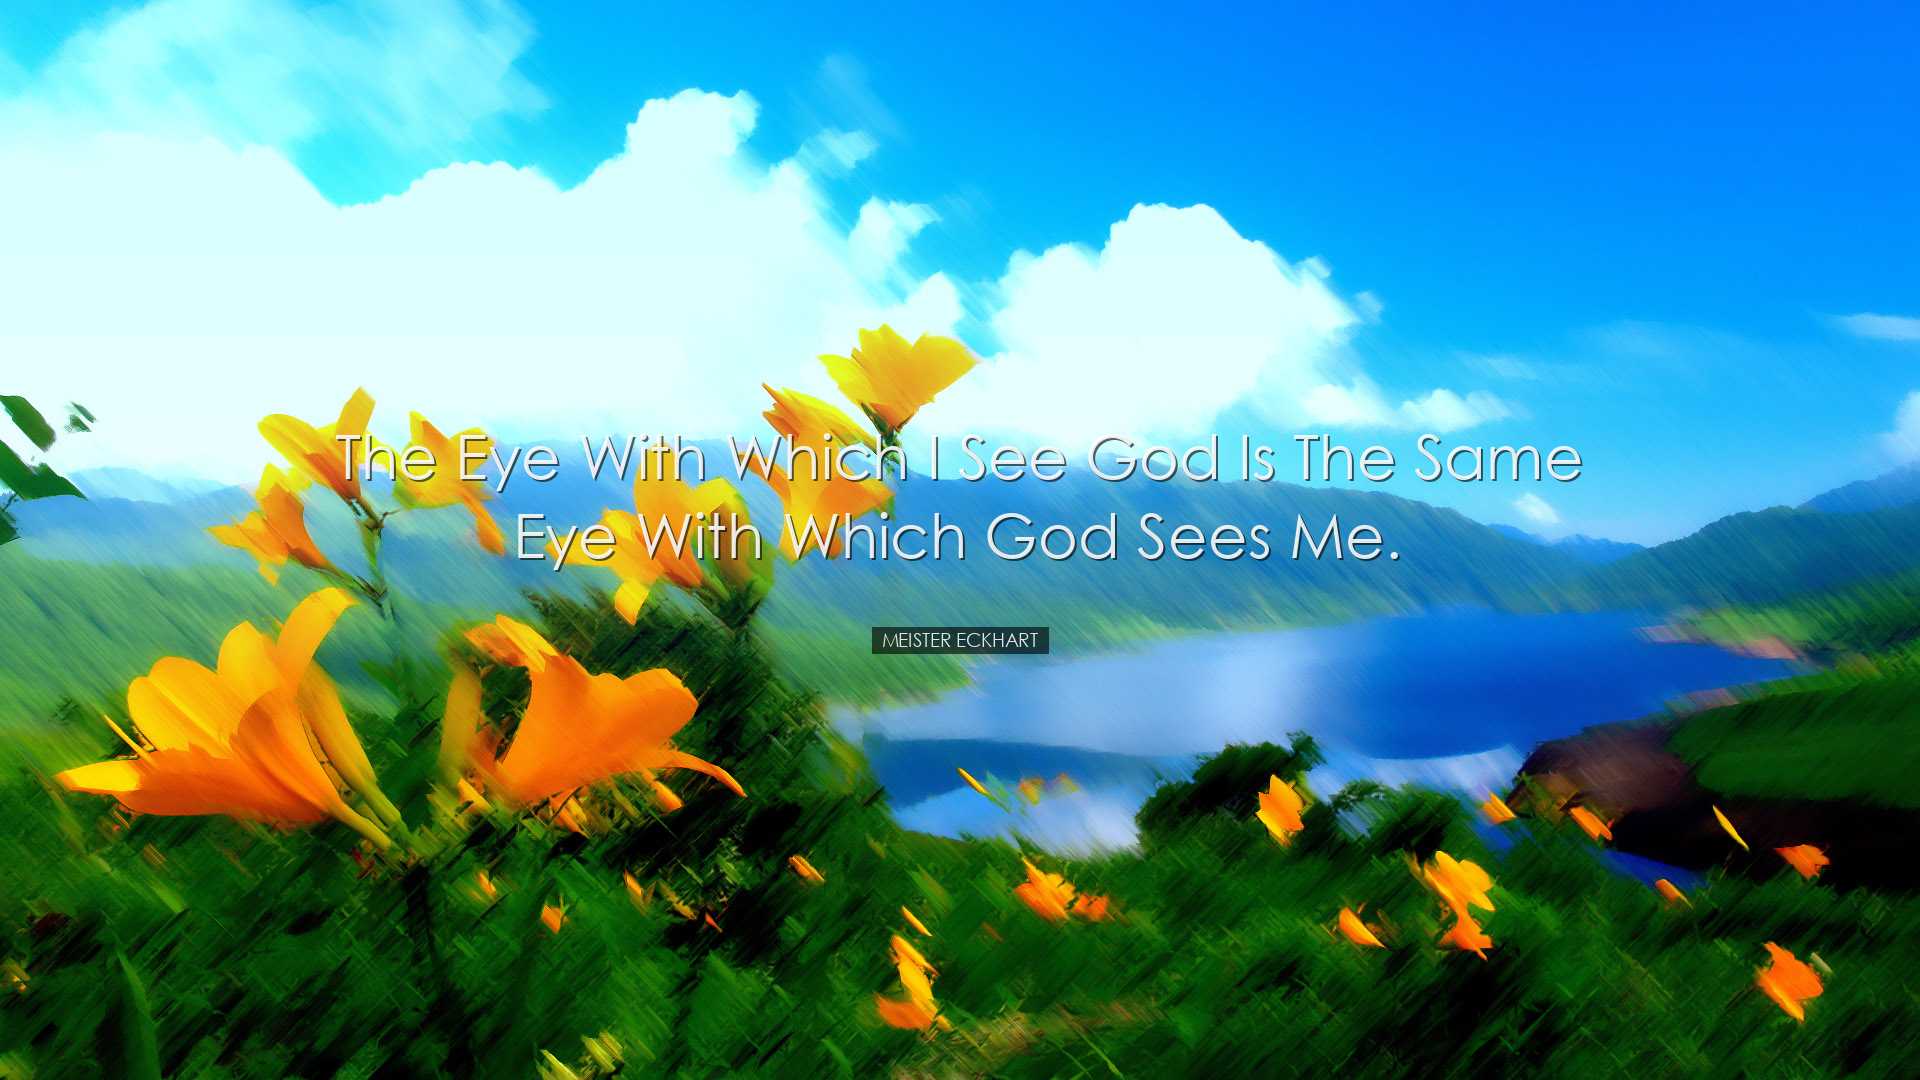 The eye with which I see God is the same eye with which God sees m